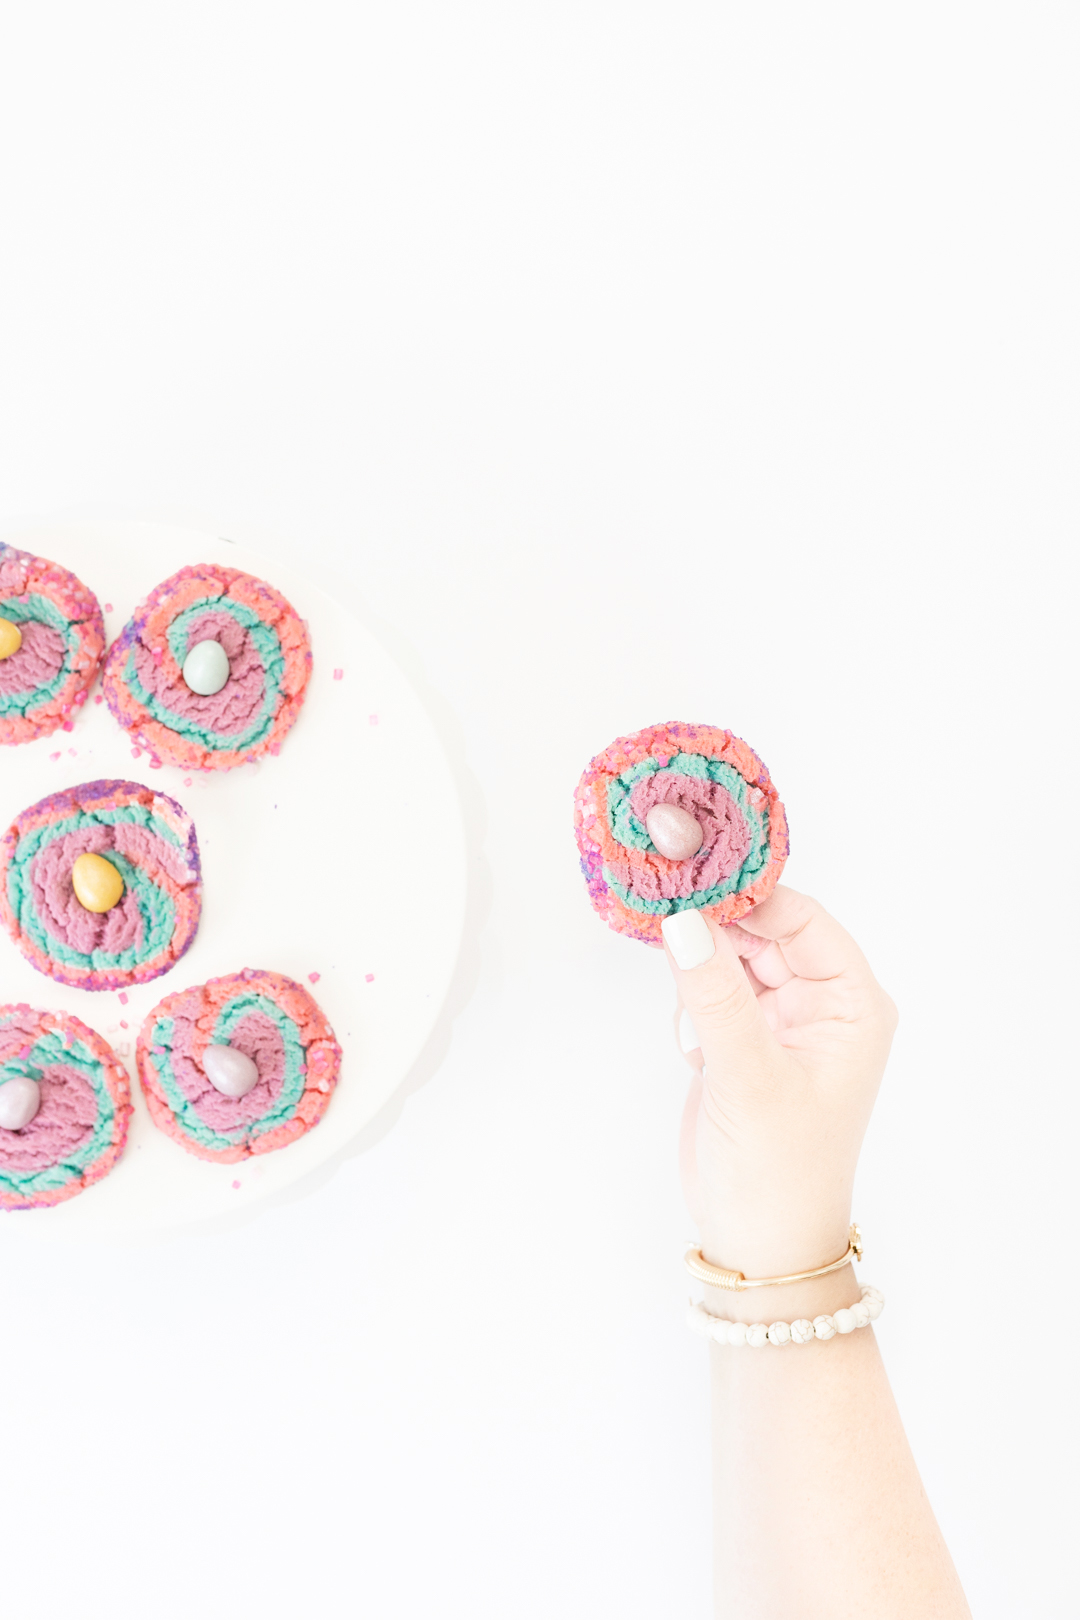 pastel swirled cookies for easter